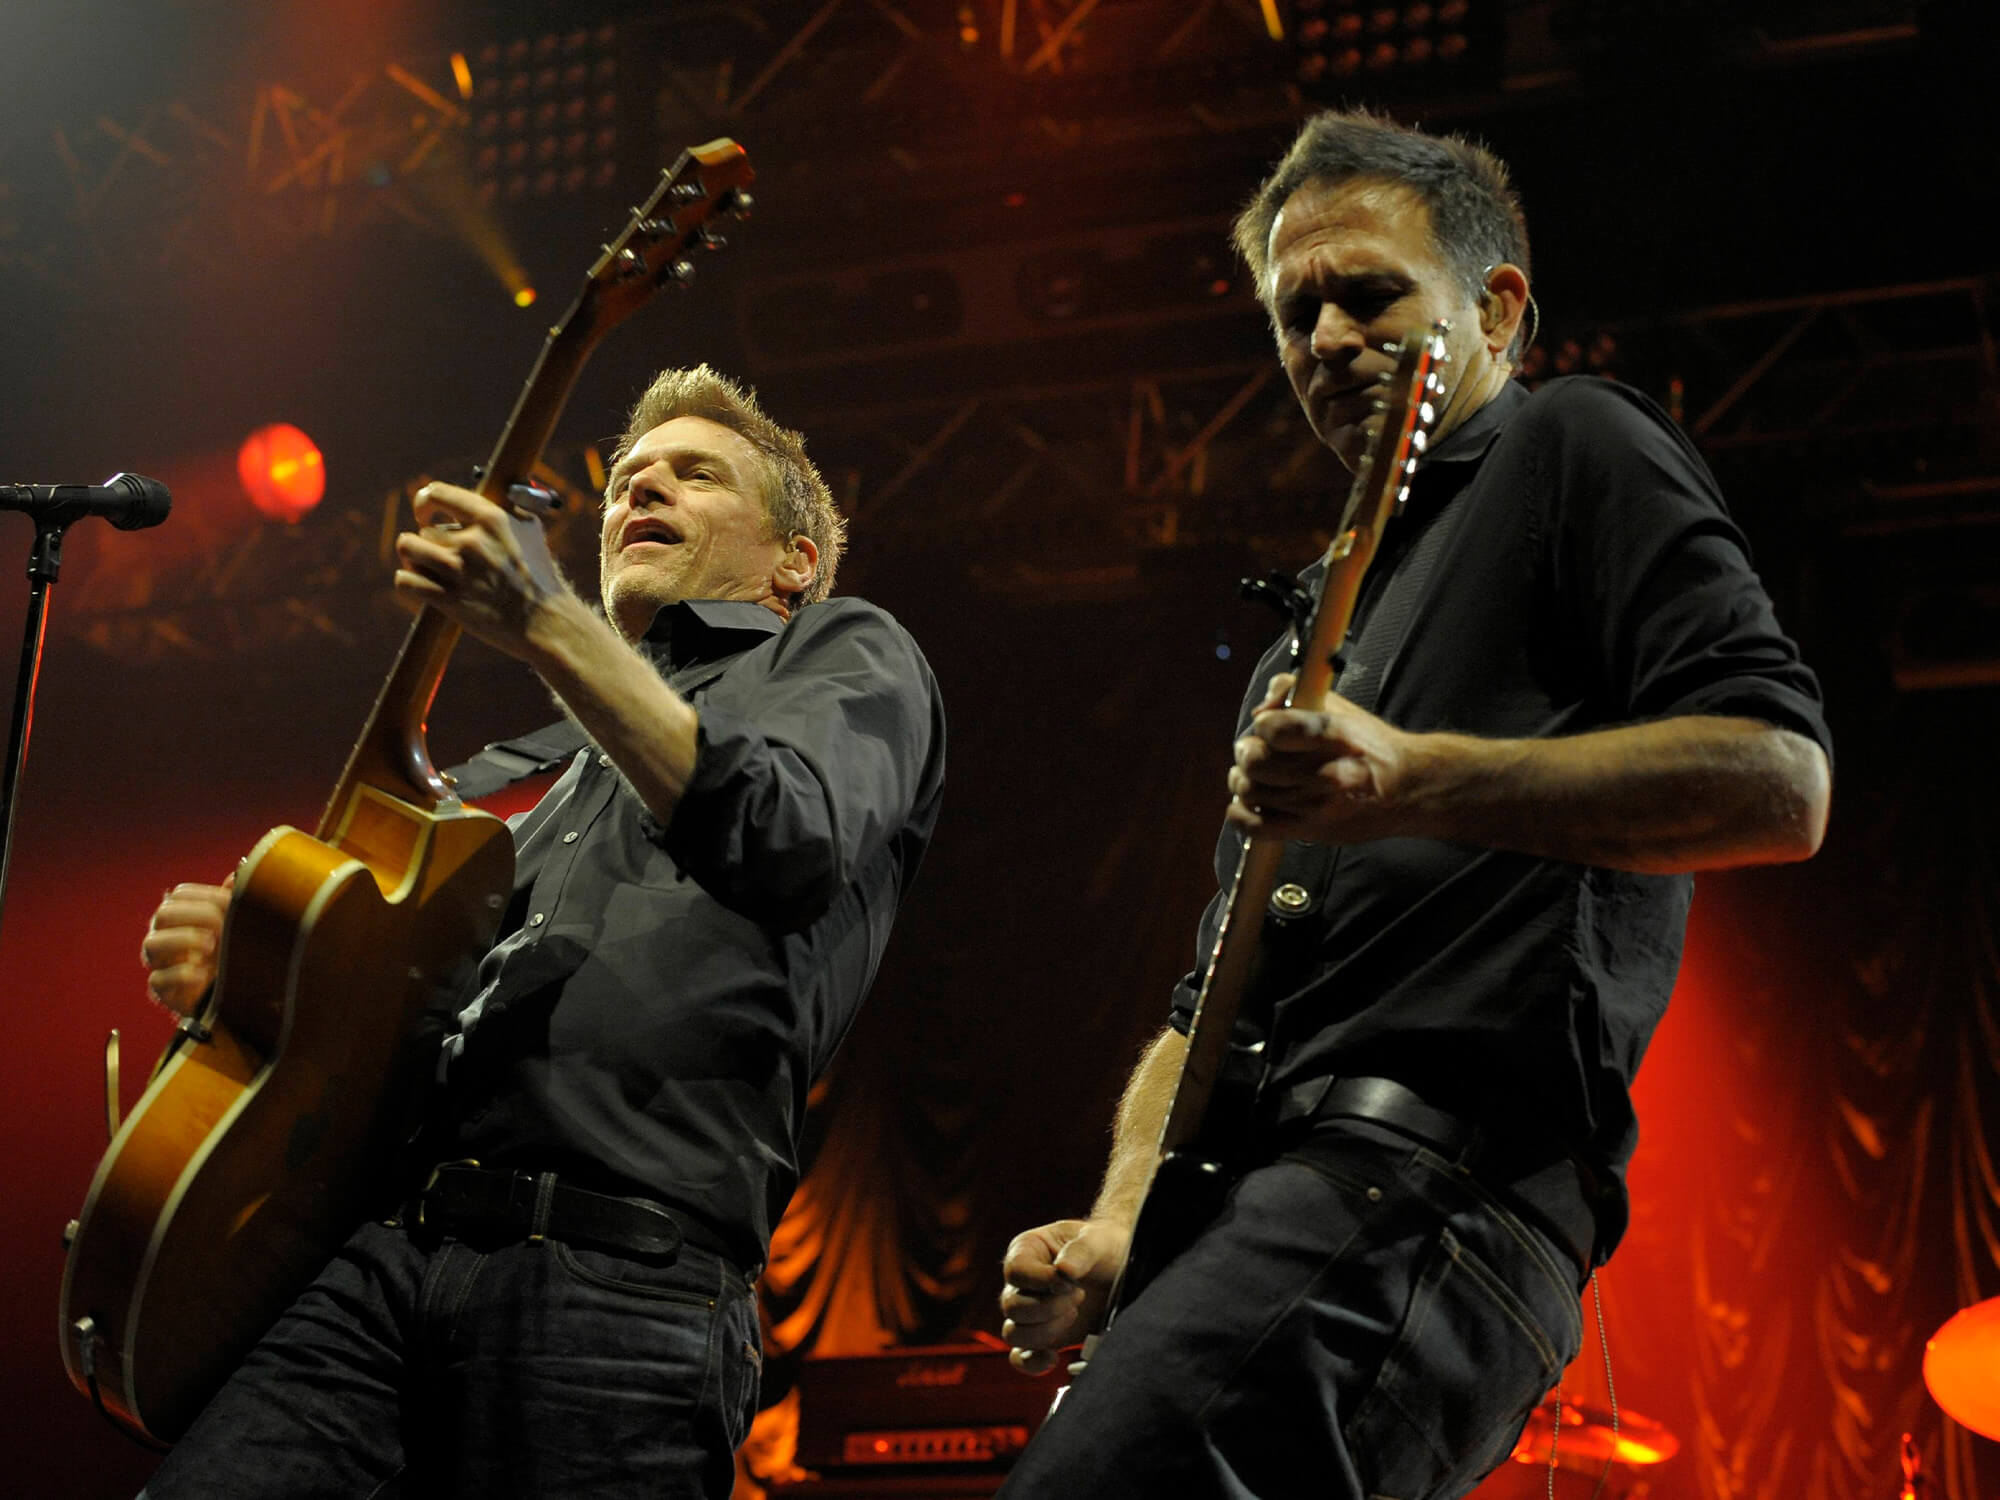 Bryan Adams and Keith Scott pictured playing guitar together on stage